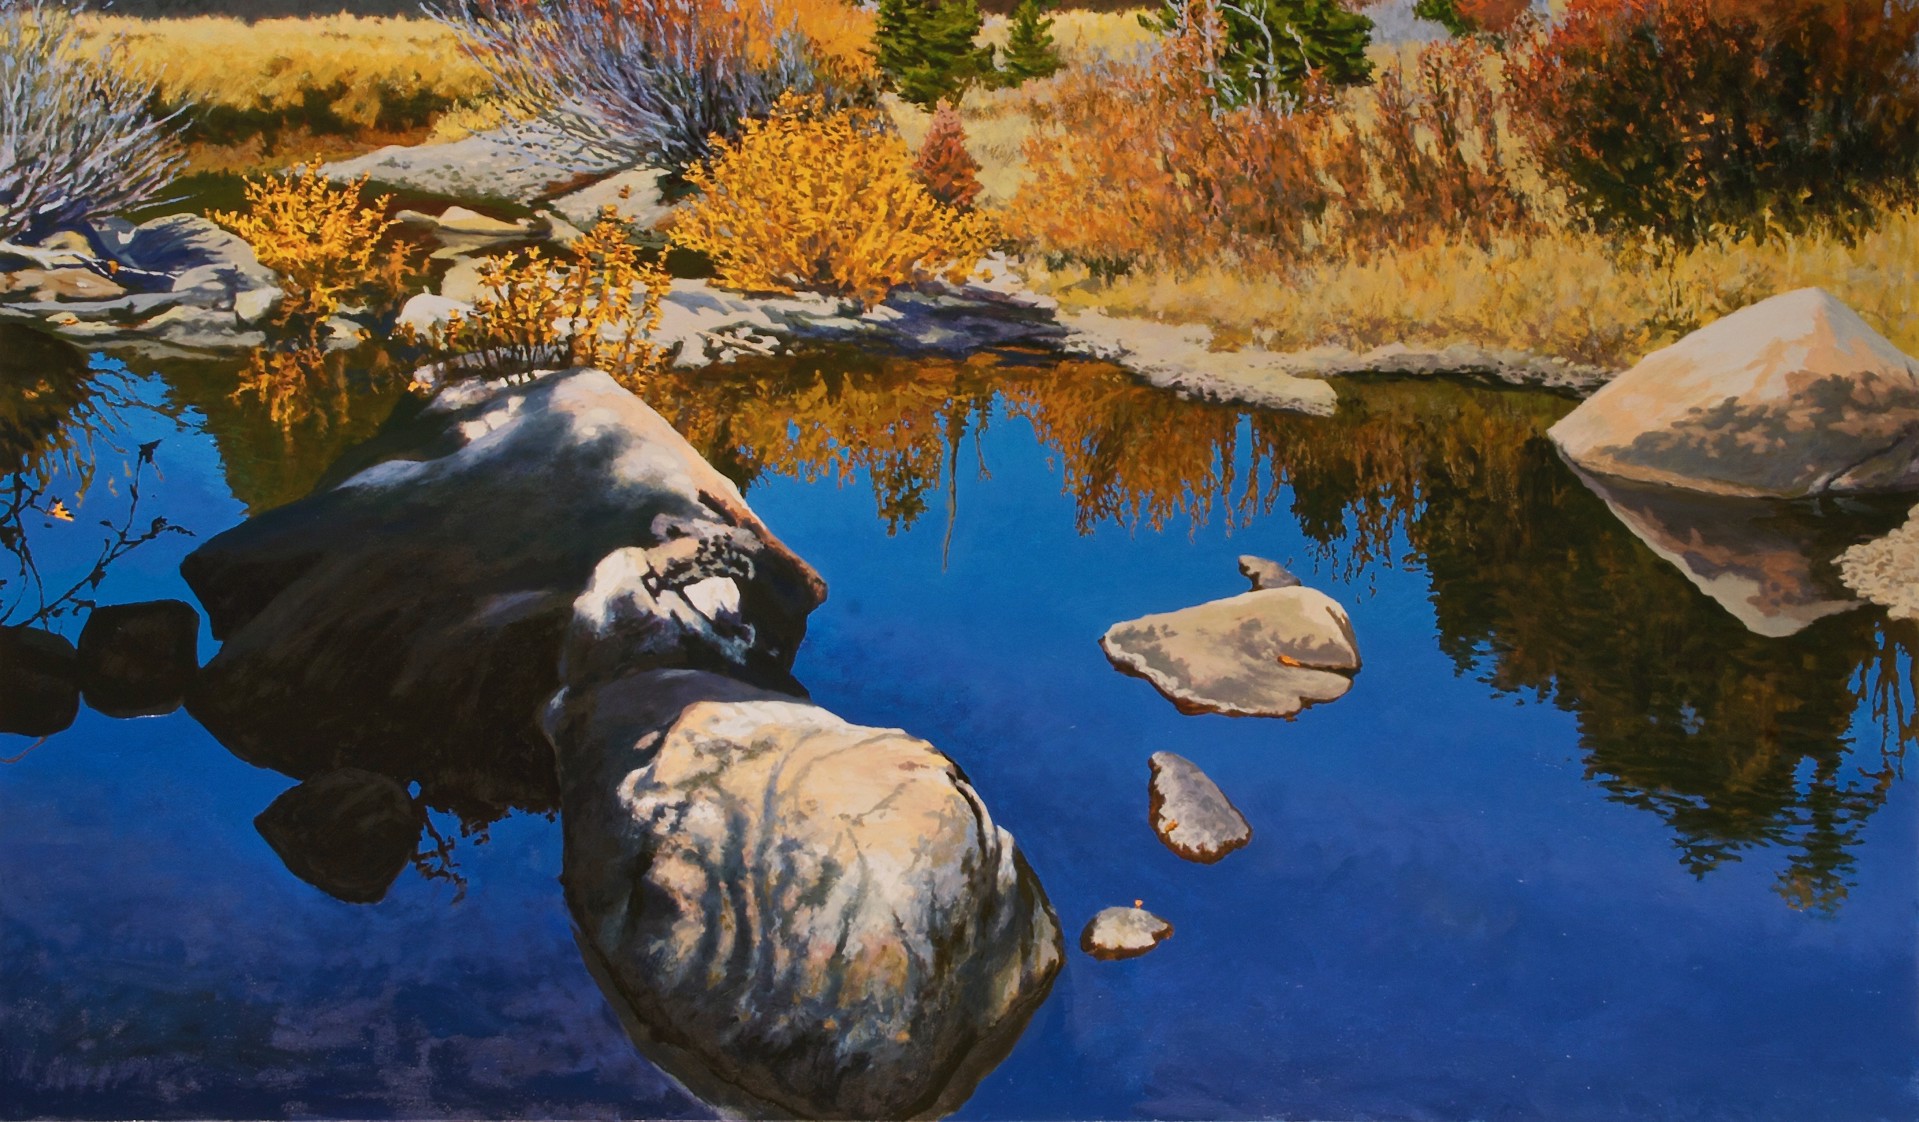 Autumn Reflections no. 2 by Peter Loftus